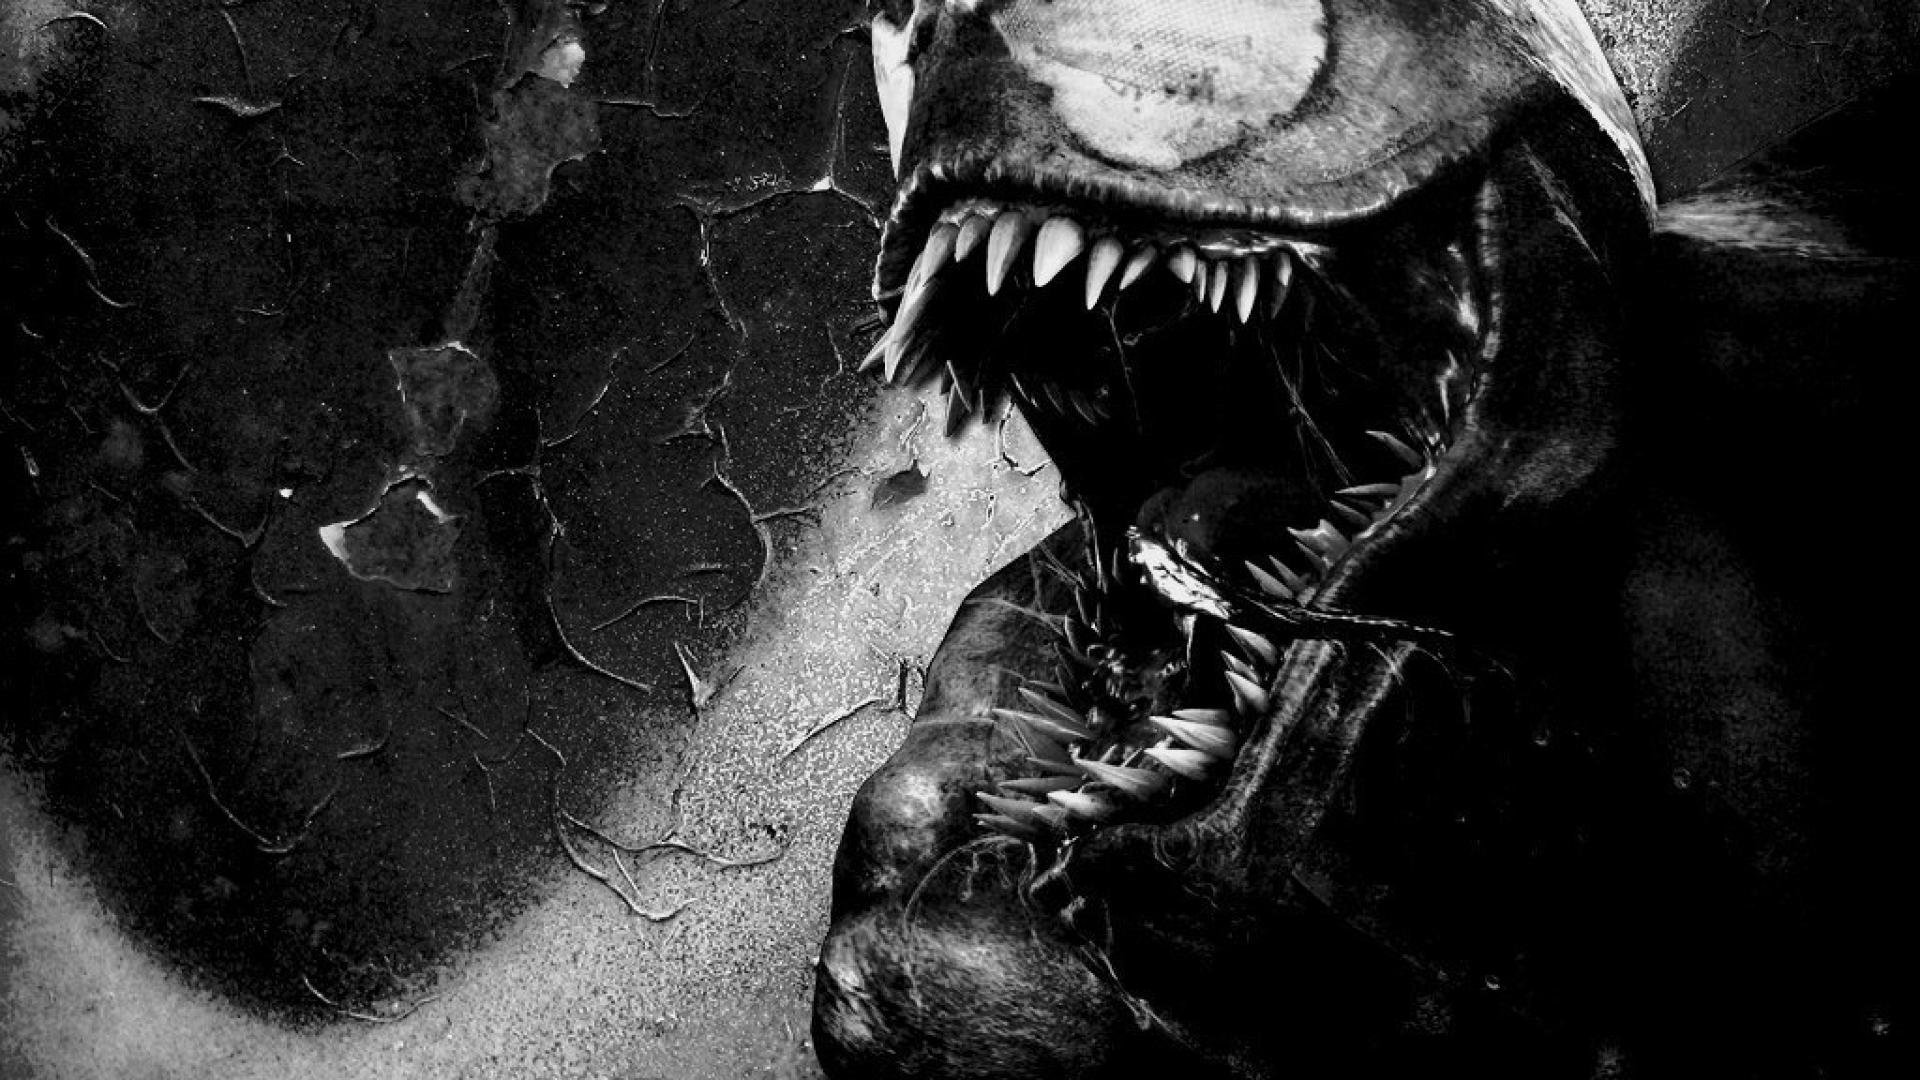 Venom Wallpapers Images Photos Pictures Backgrounds